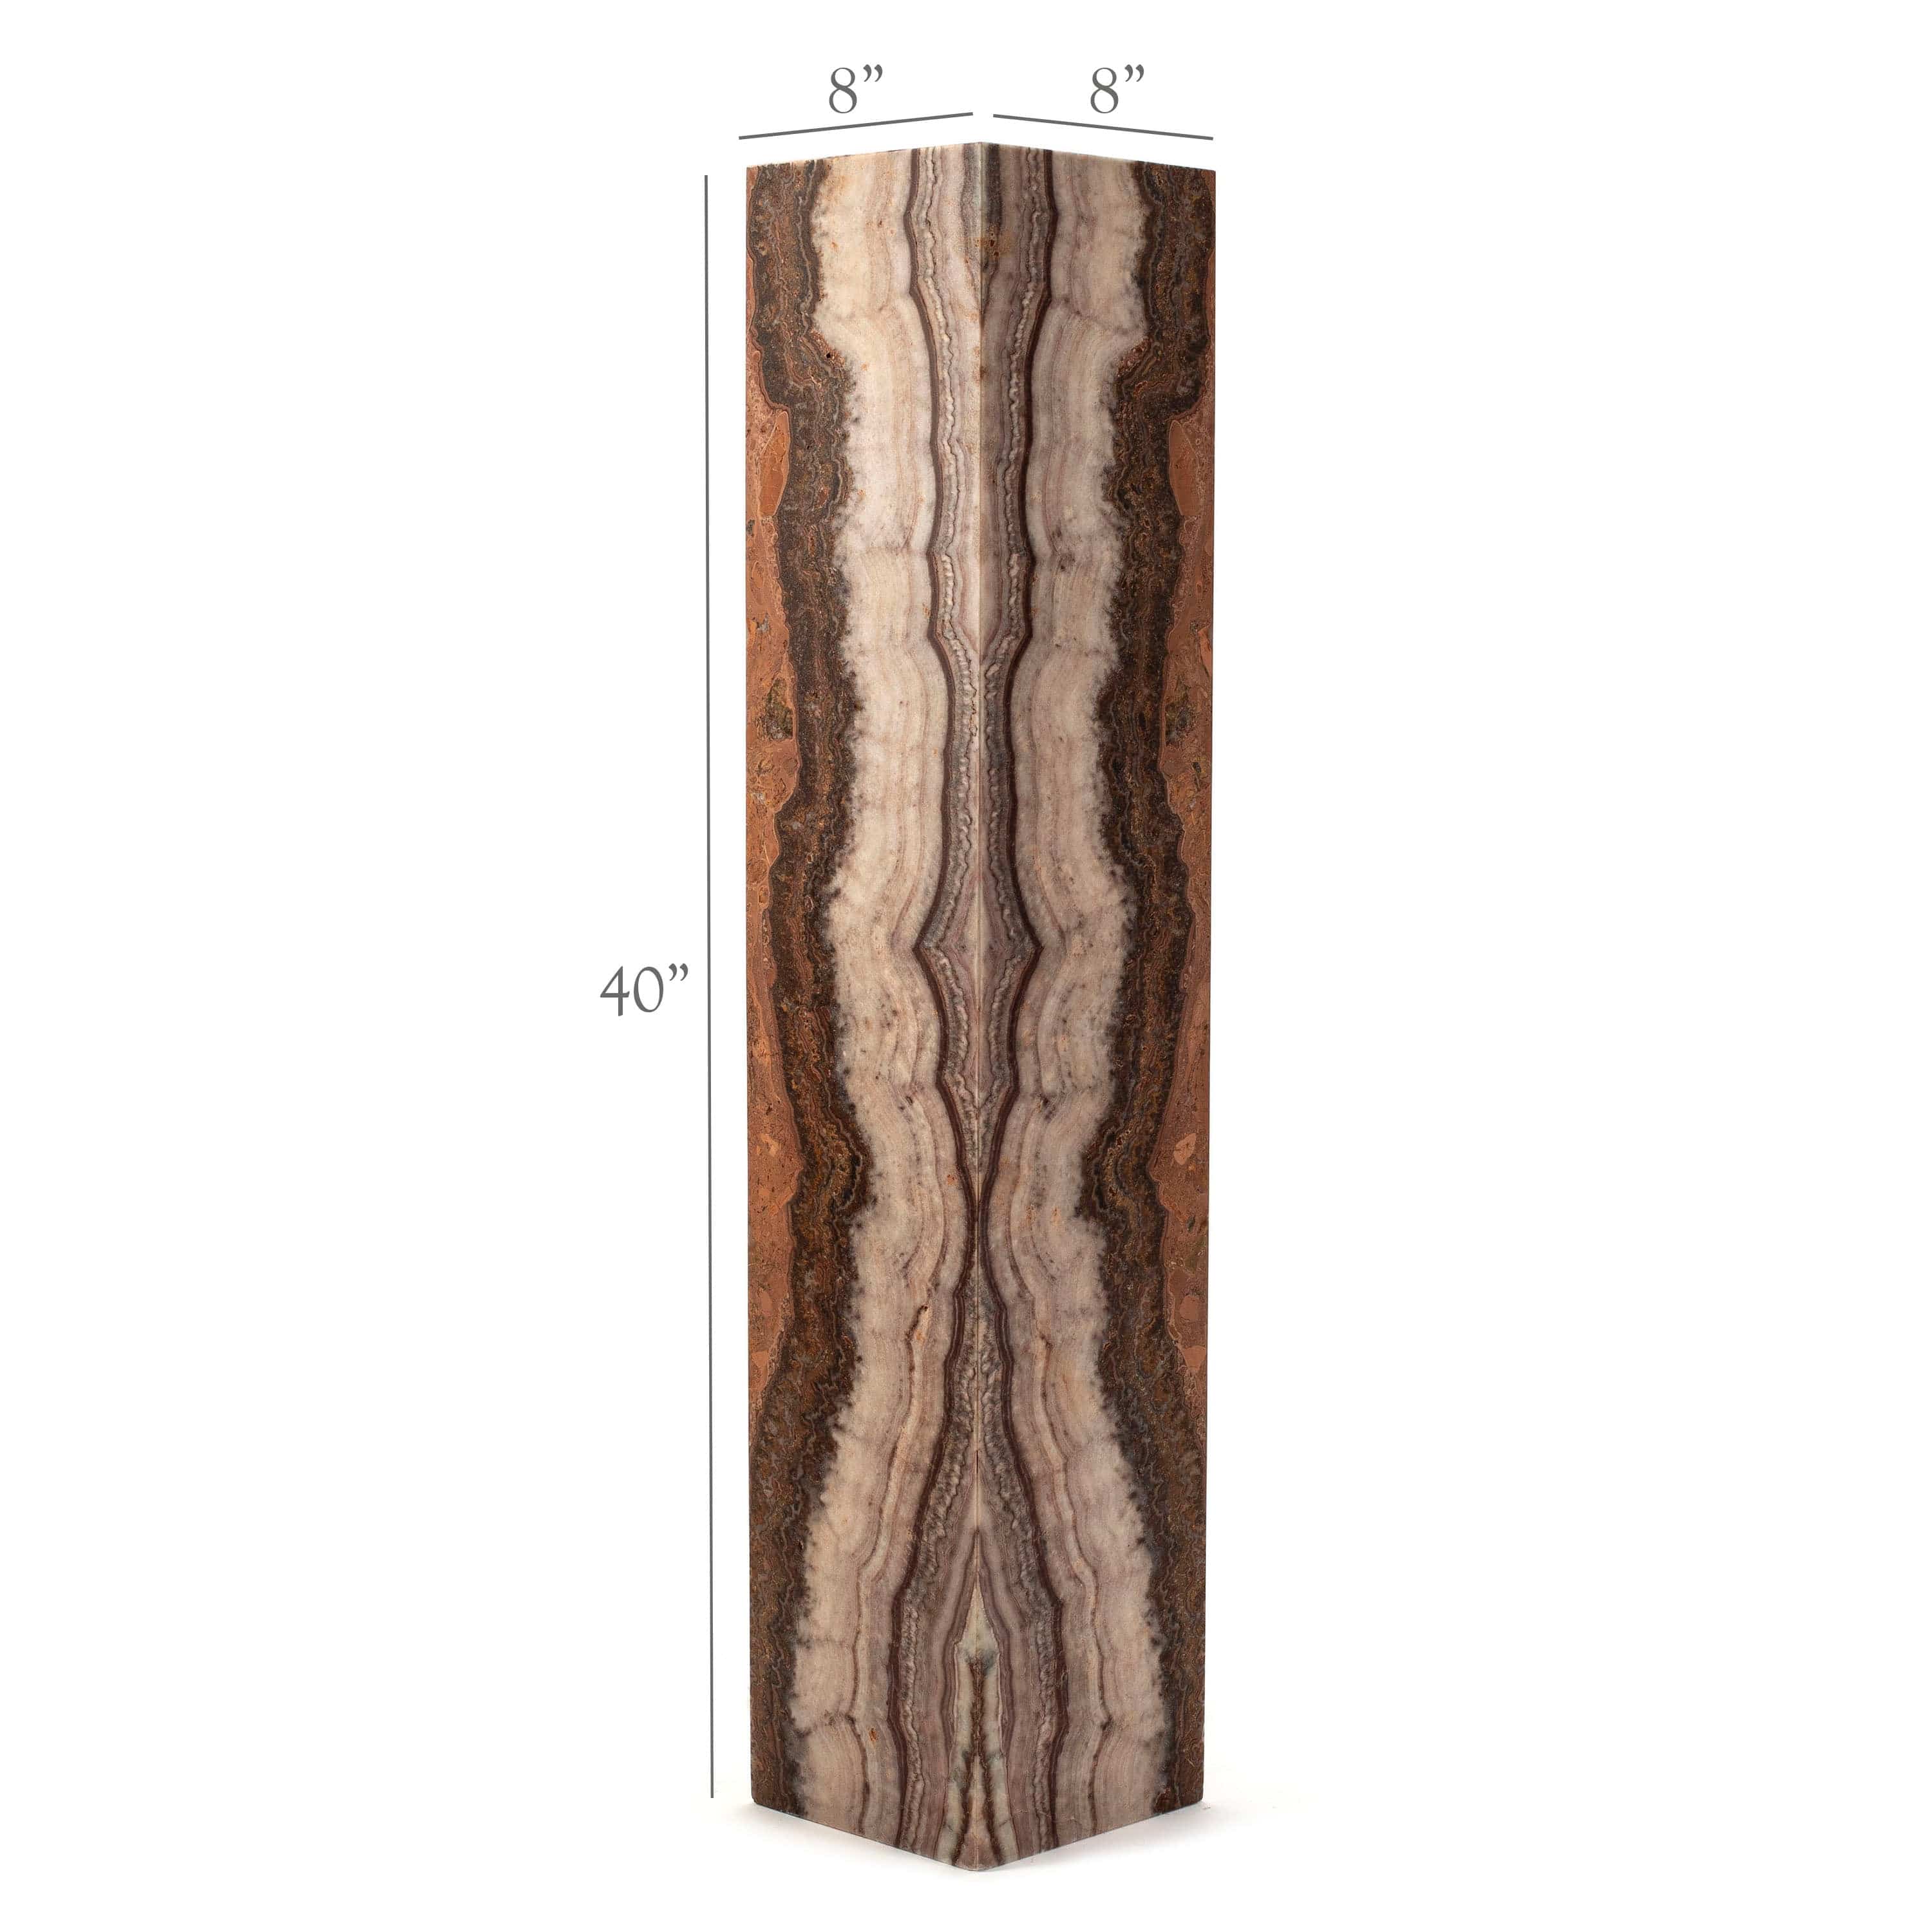 Kalifano Light Towers Natural Pink Onyx Lamp Light Tower from Mexico - 40" tall LT10020-PK.004